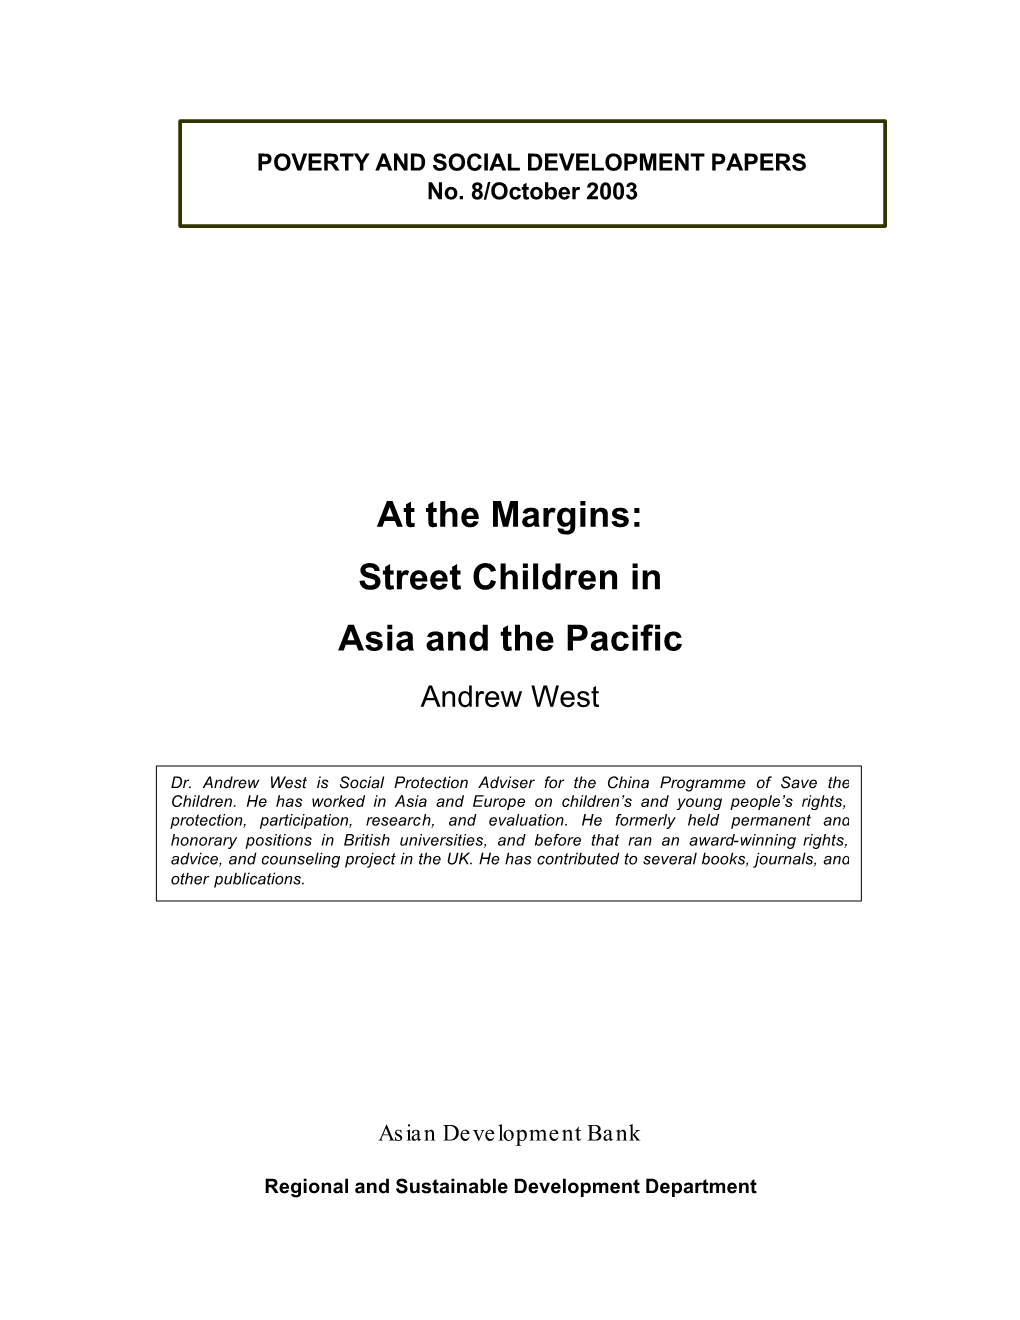 At the Margins: Street Children in Asia and the Pacific Andrew West